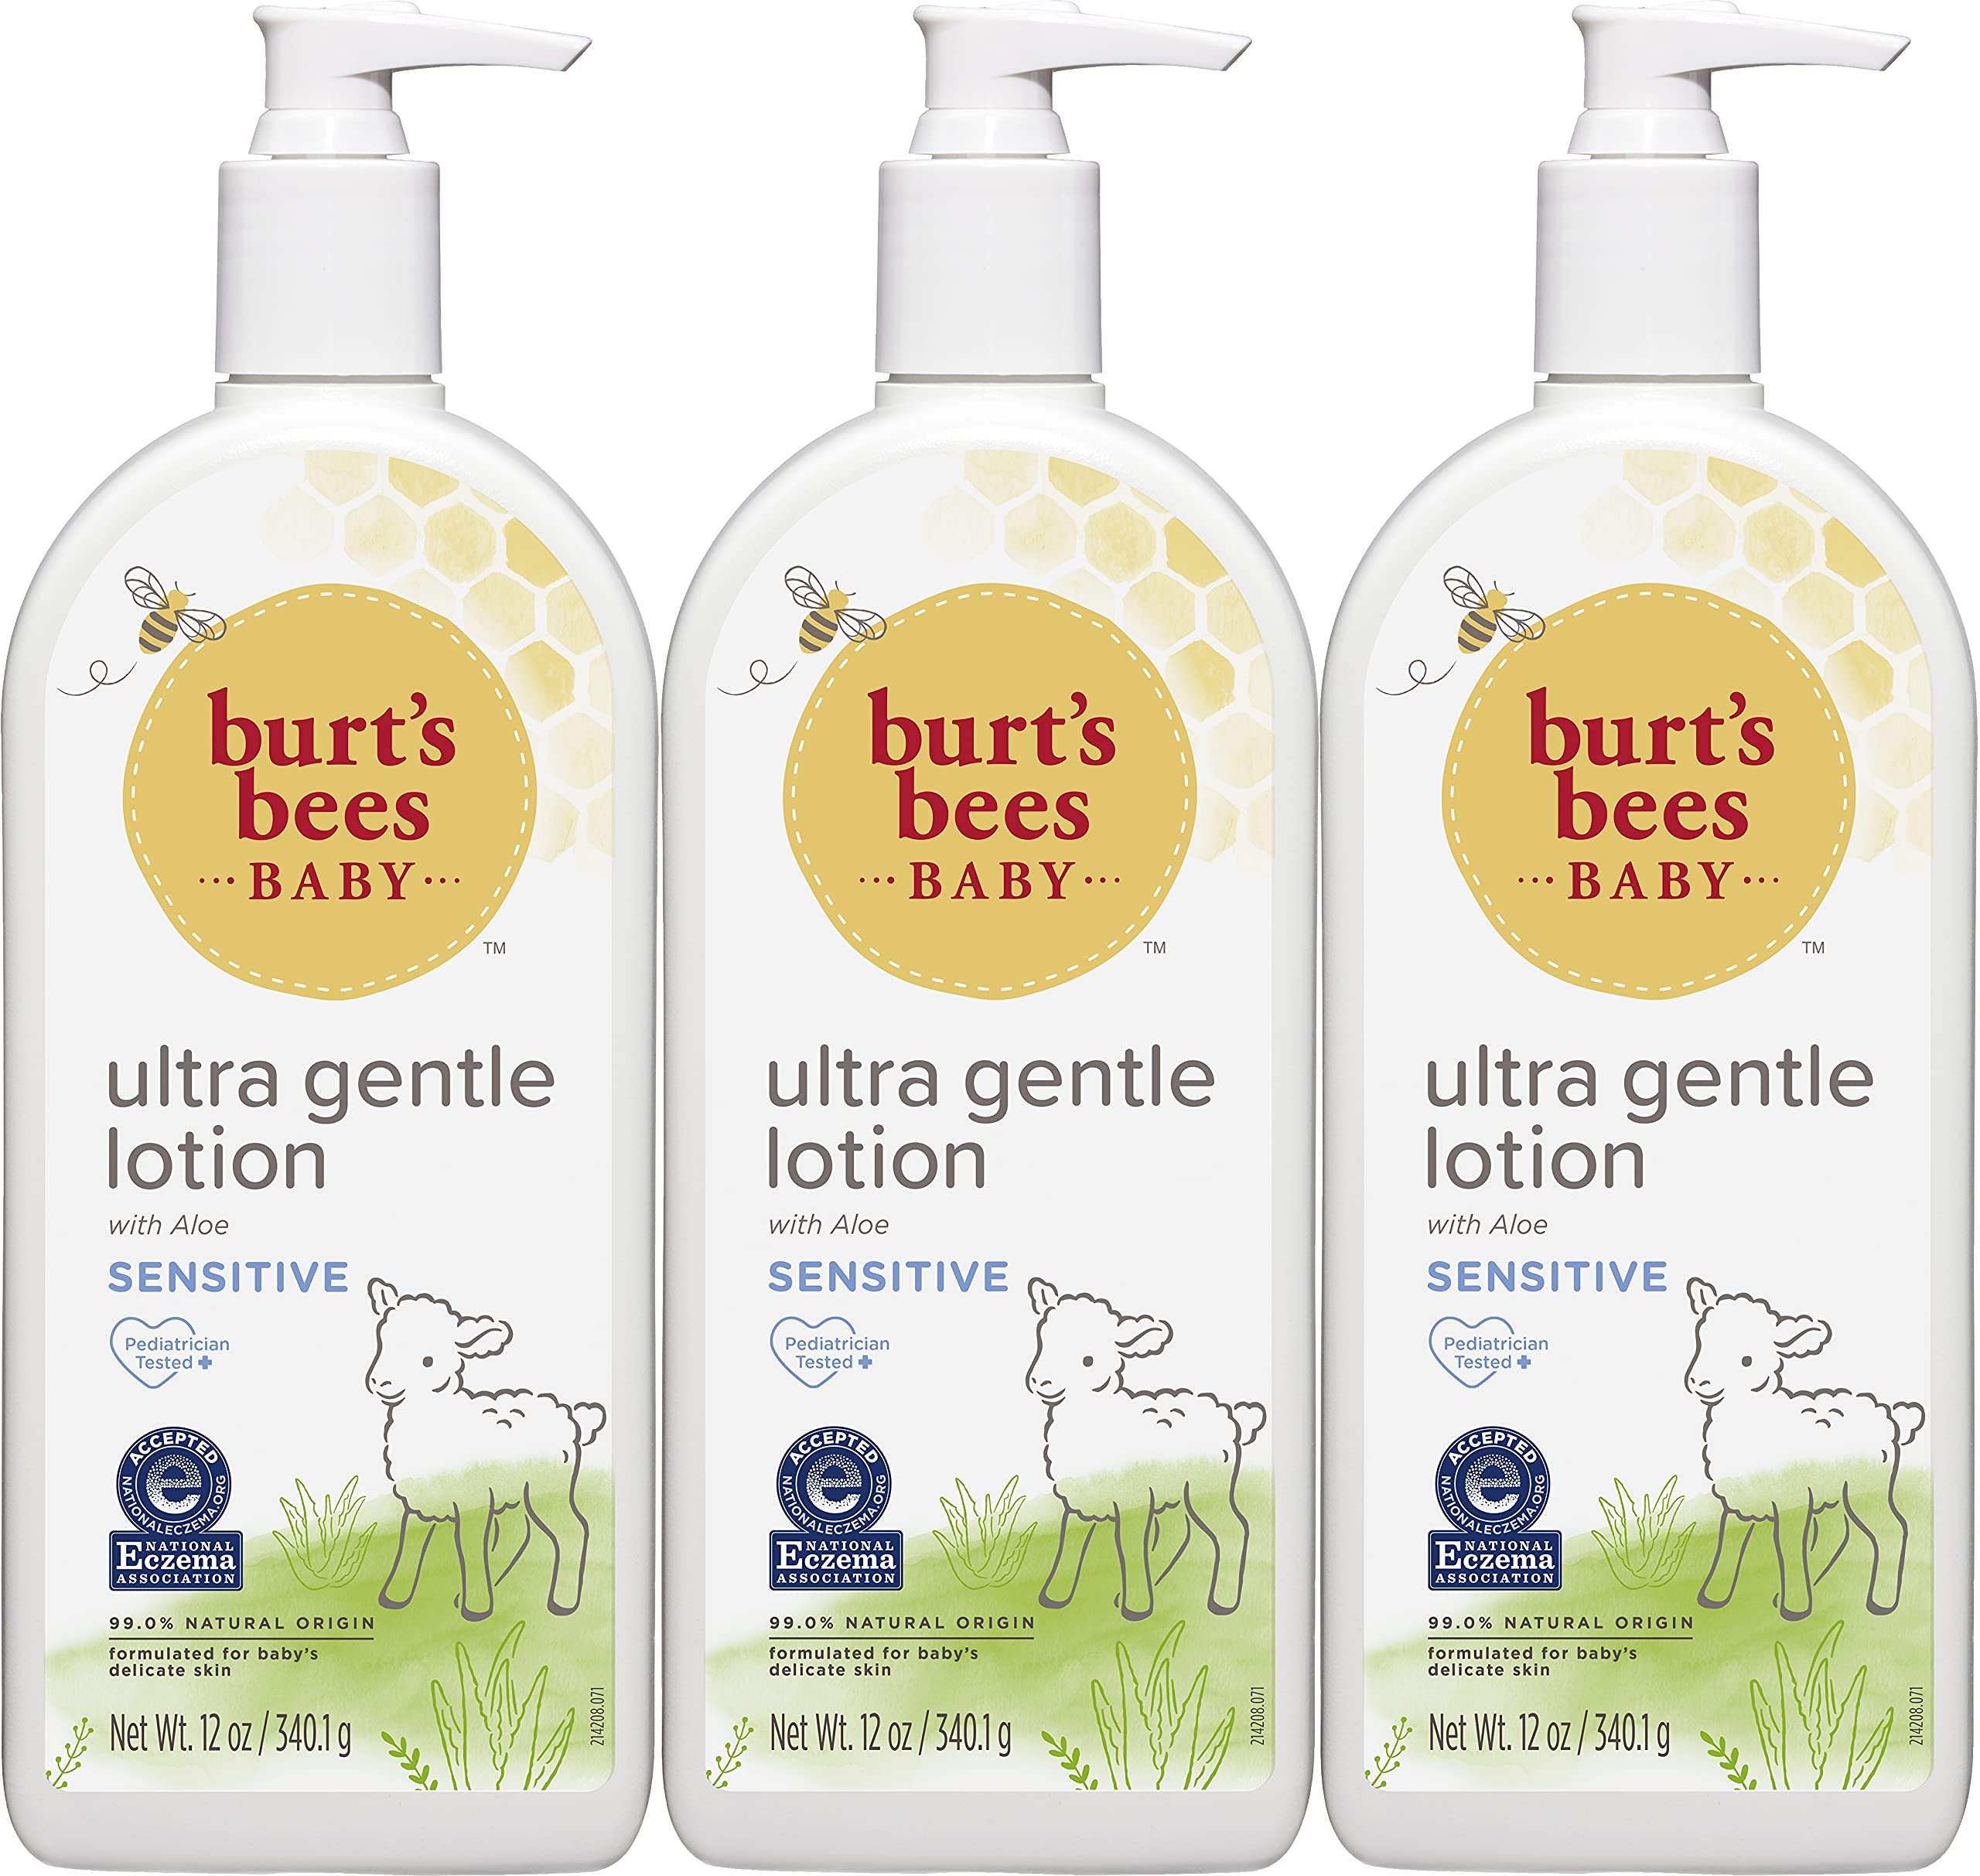 Burt's Bees Baby Ultra Gentle Lotion for Sensitive Skin - 12 Ounce (Pack of 3)